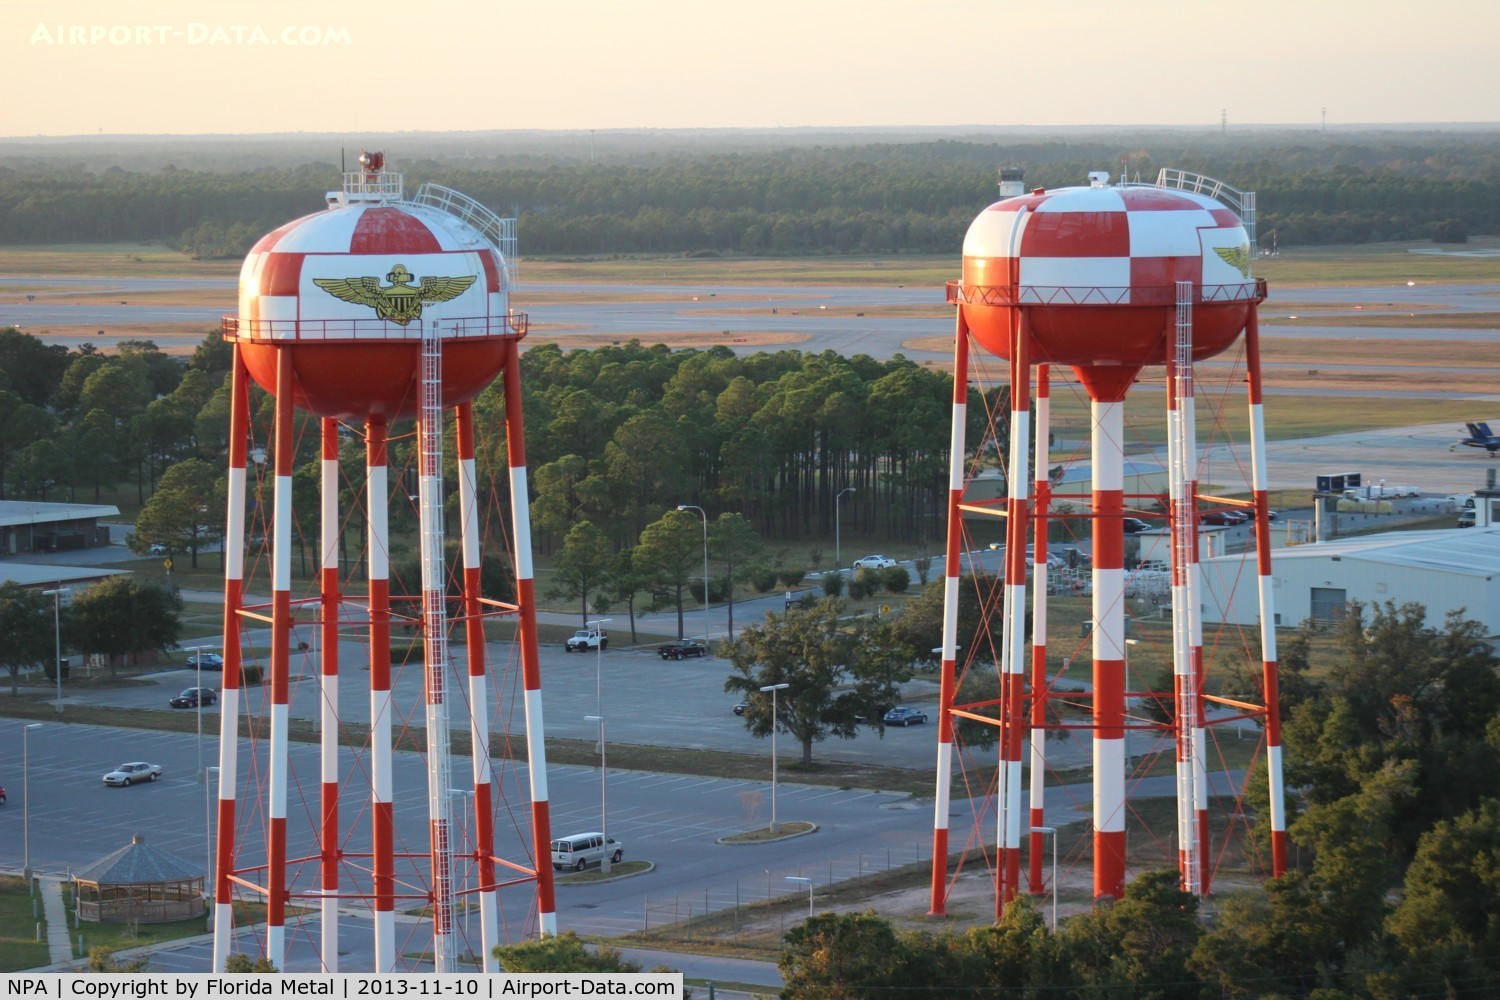 Pensacola Nas/forrest Sherman Field/ Airport (NPA) - Water towers and runways at Forest Sherman Field